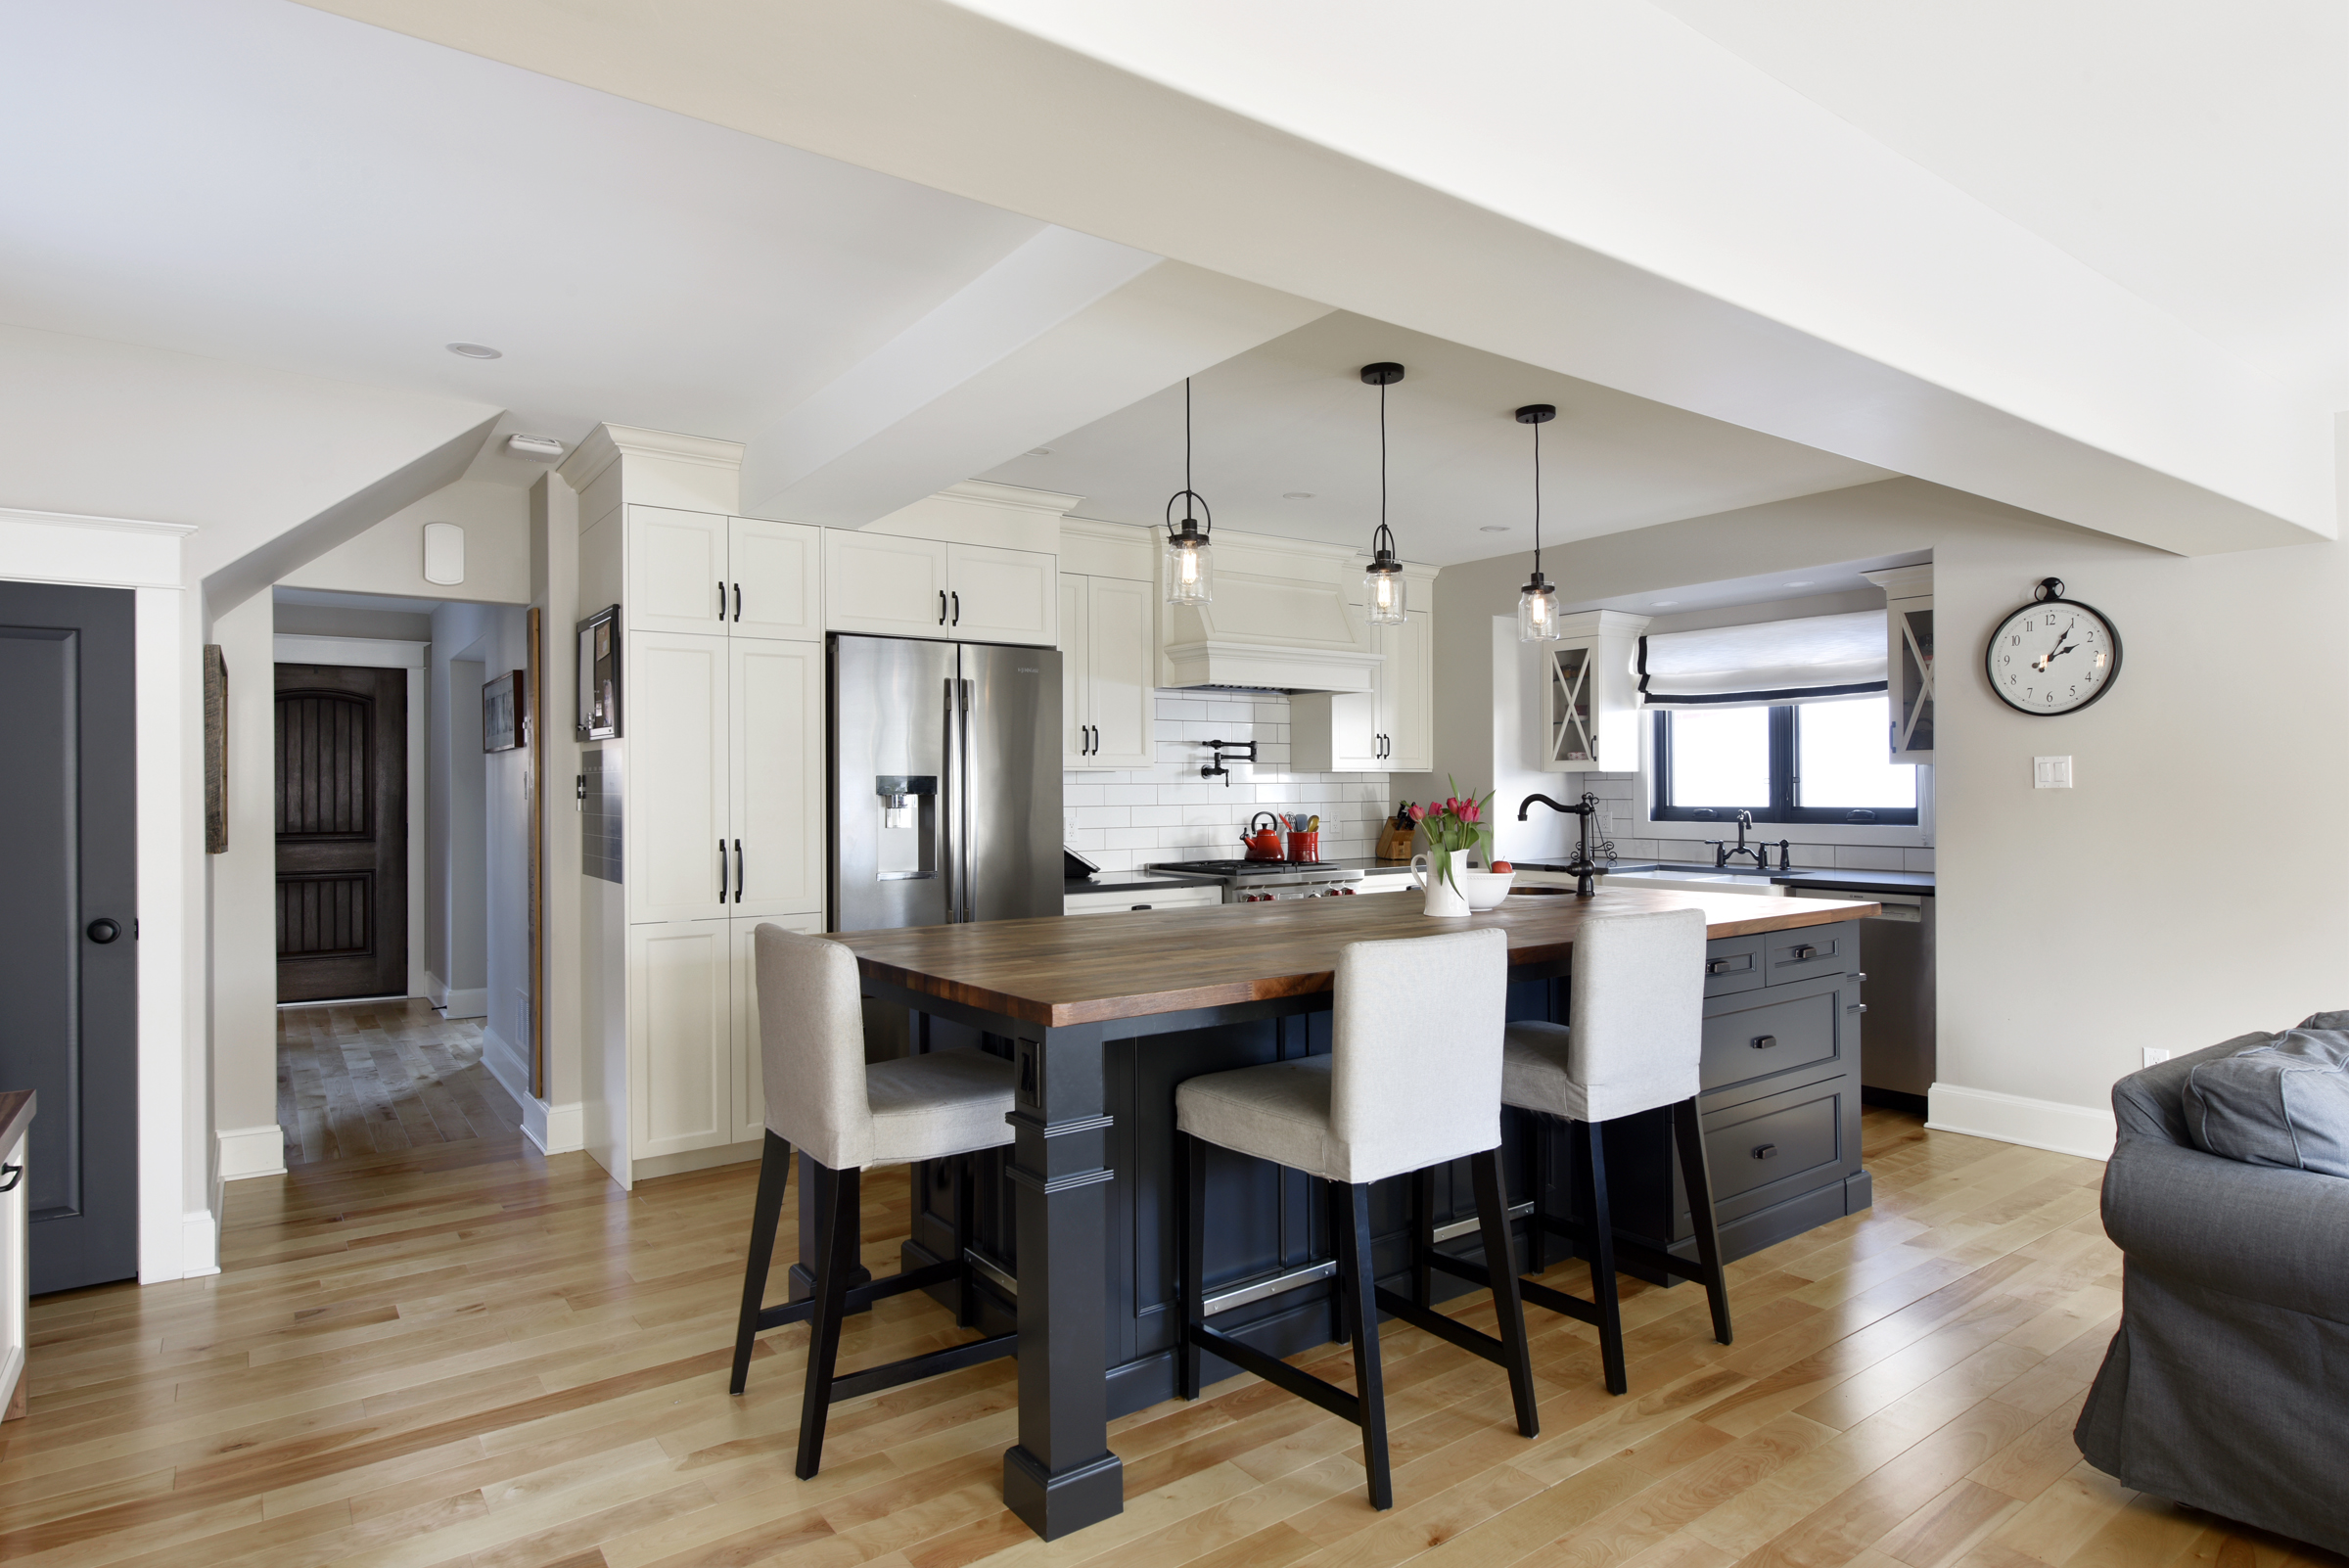 Amsted Design-Build, Ottawa, ON: "Personalized Planning In The Kitchen